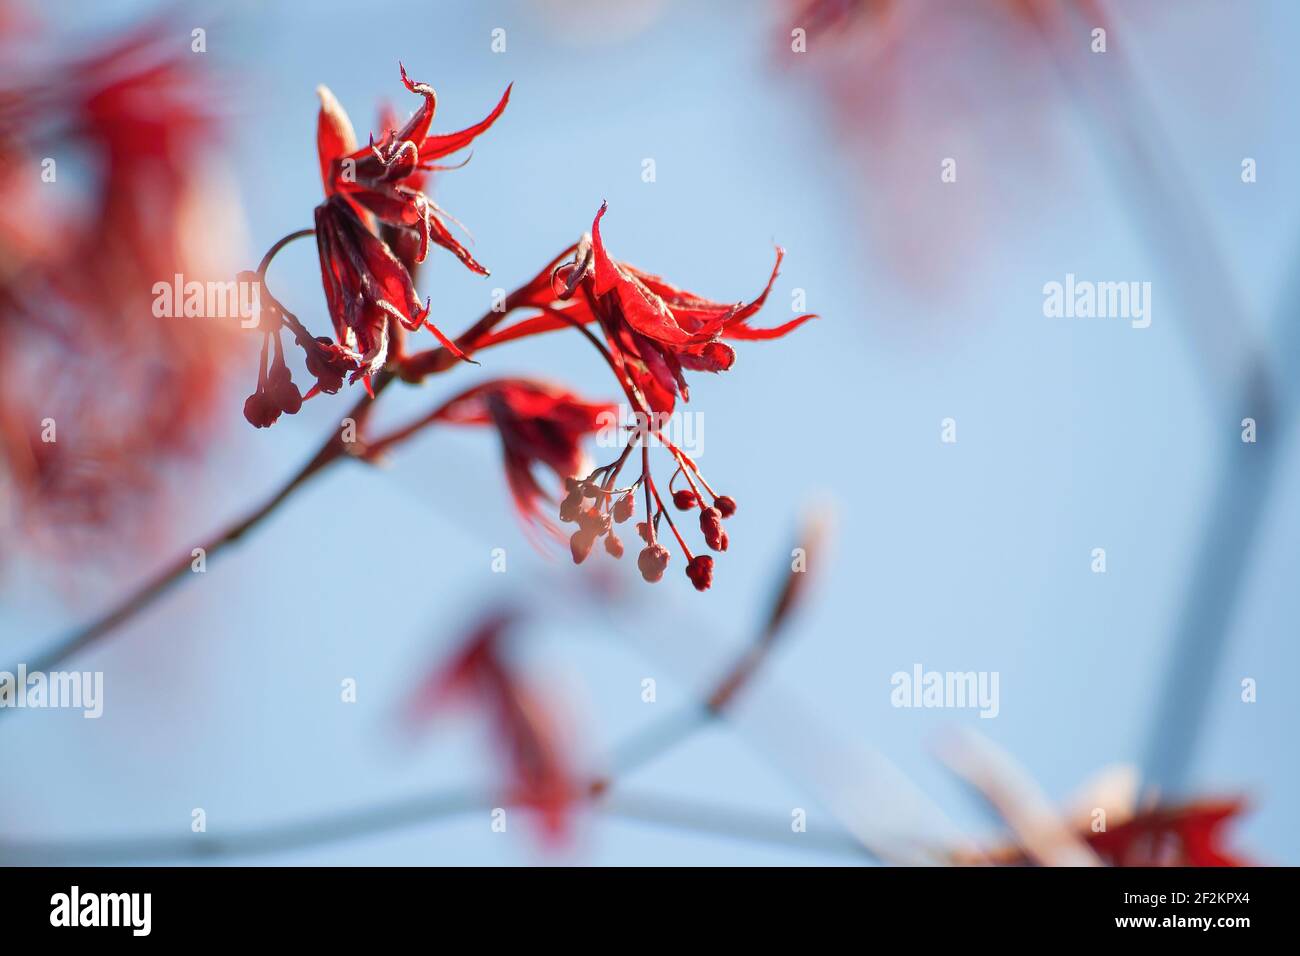 Acer palmatum blooming red flowers and leaves close up, selective focus Stock Photo